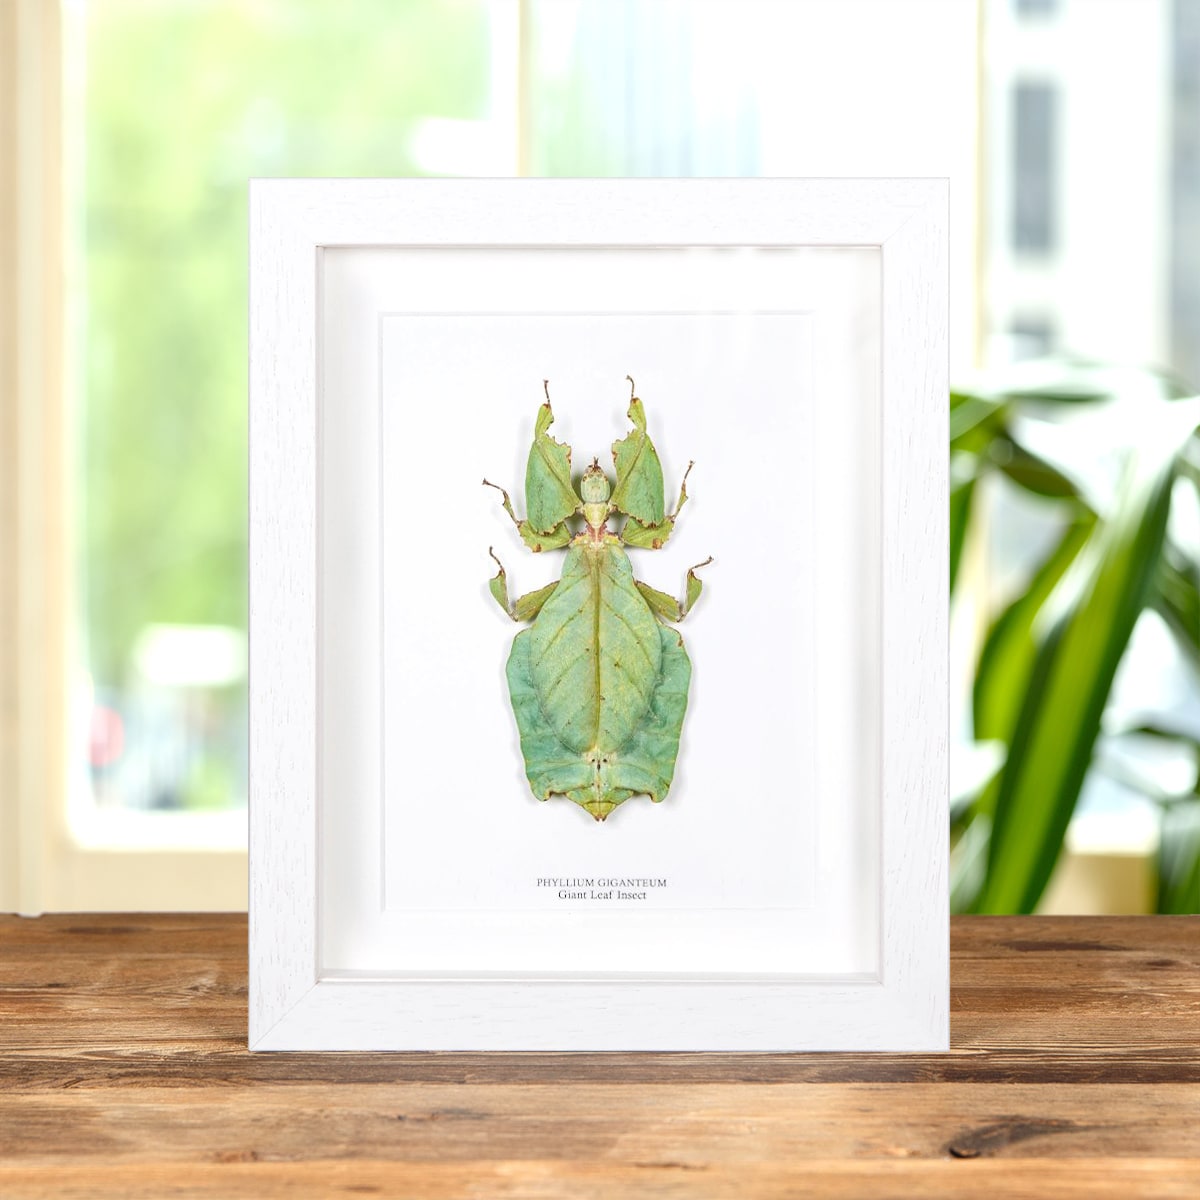 Giant Leaf Insect in Box Frame (Phyllium giganteum)